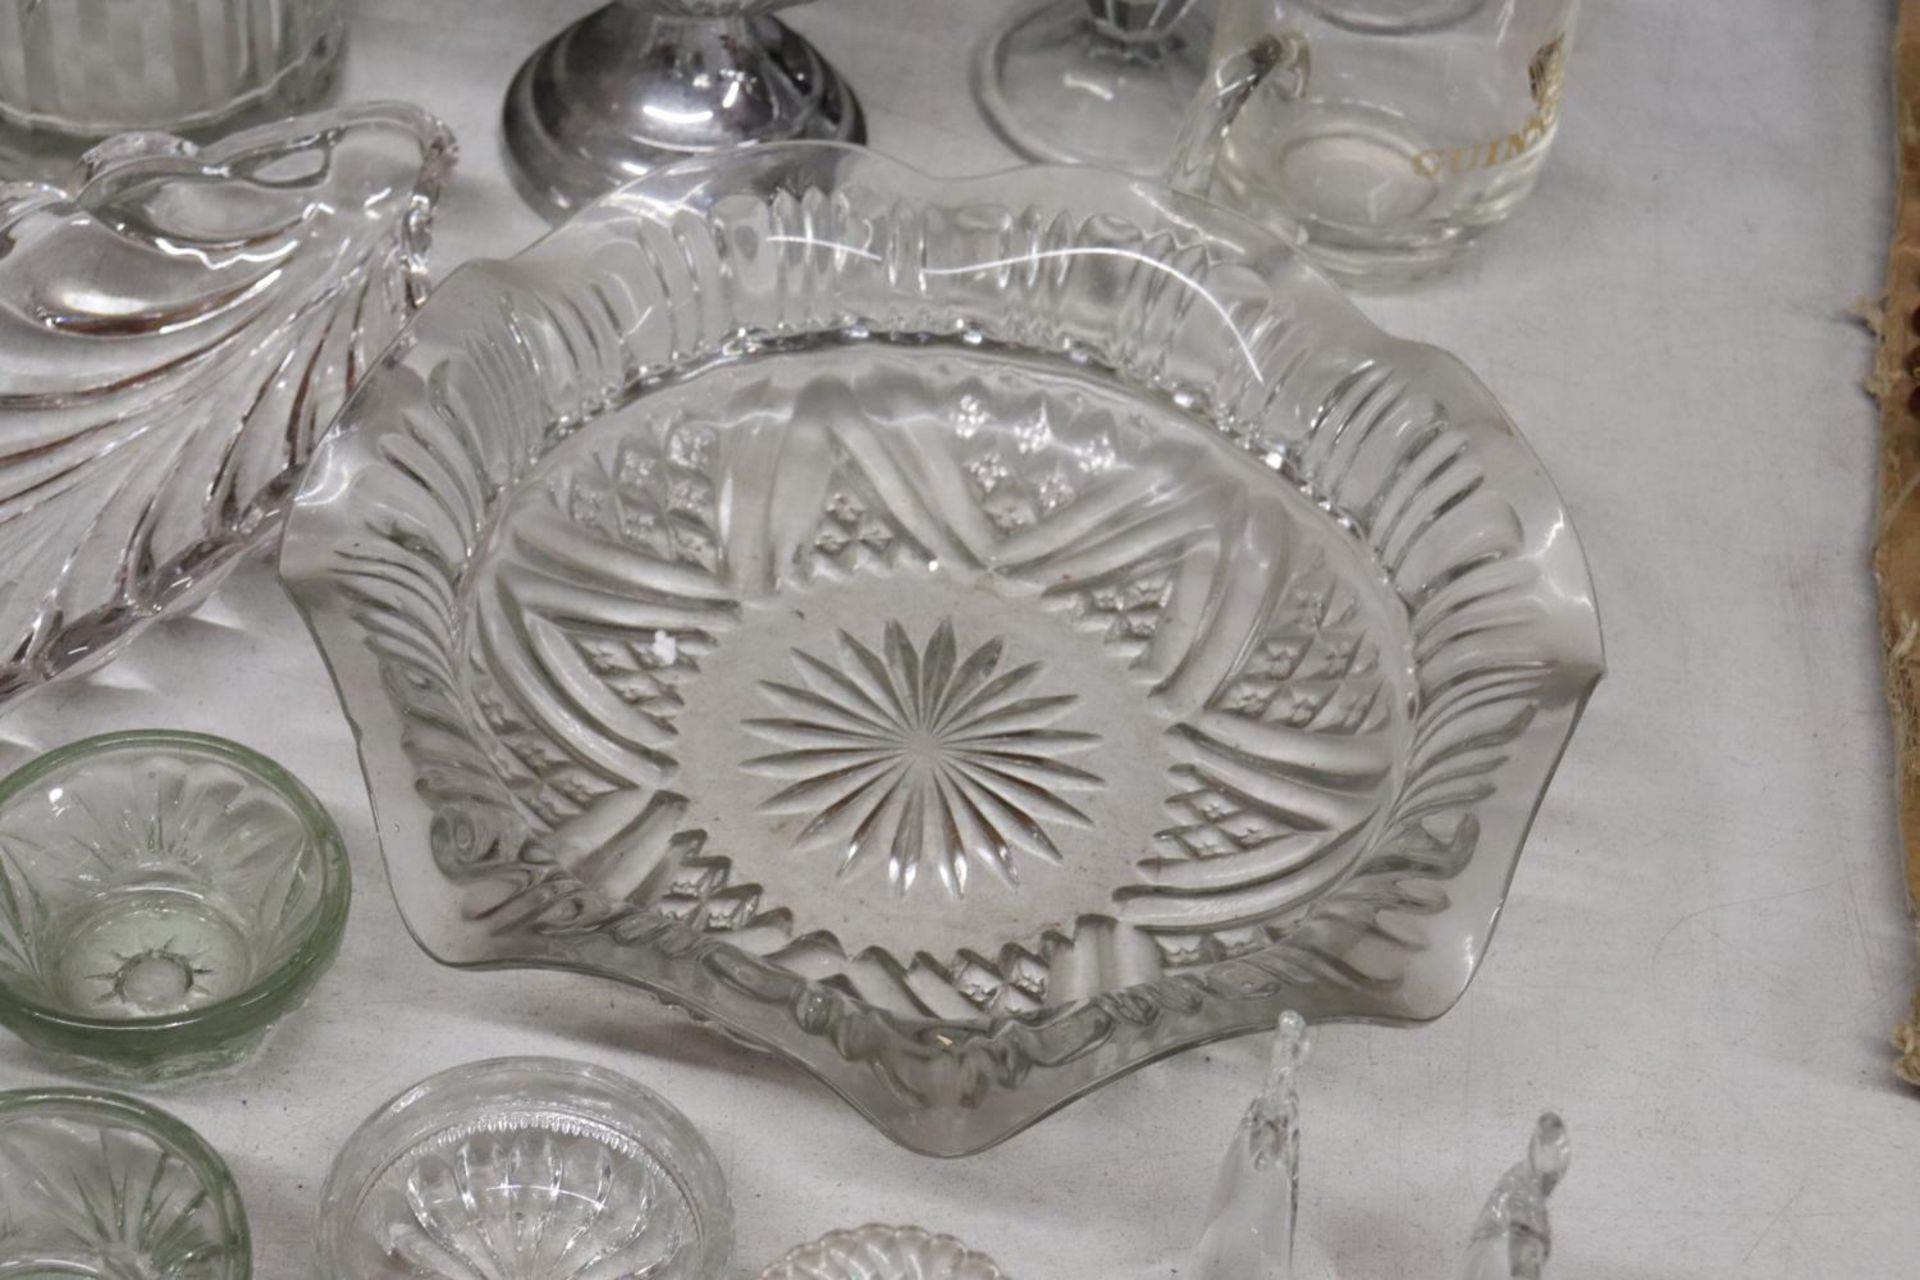 A QUANTITY OF VINTAGE GLASSWARE TO INCLUDE VASES, BOWLS, A TANKARD, A PAIR OF DOLPHINS, TEALIGHT - Image 6 of 6